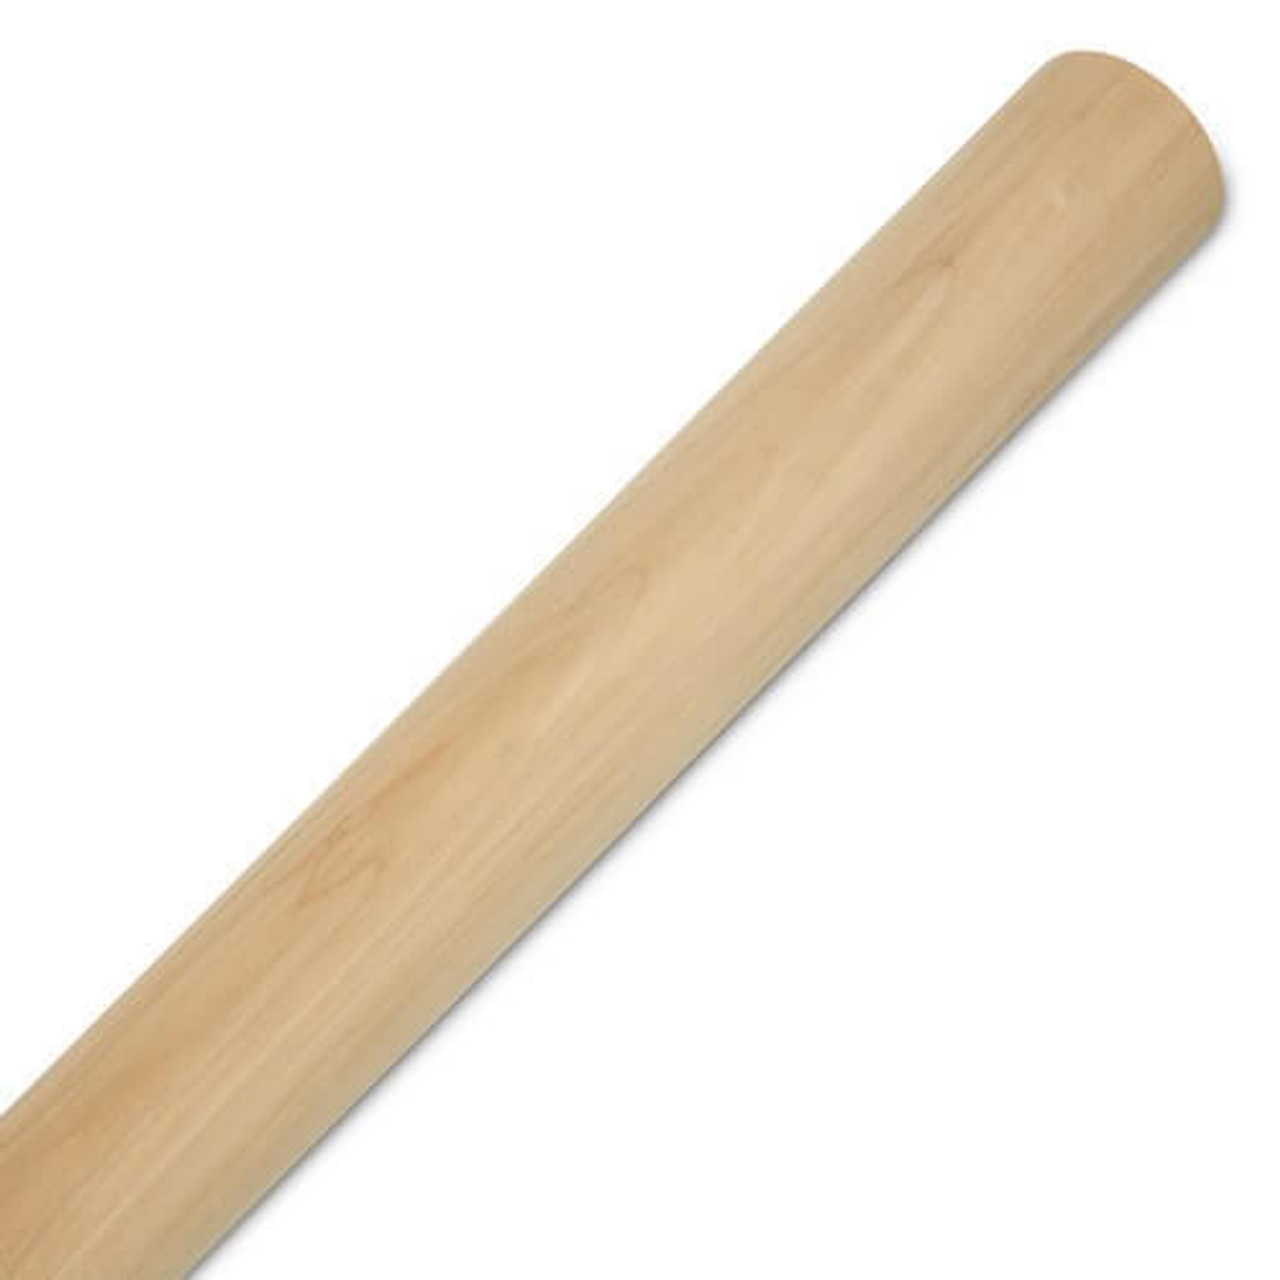 3/4 Inch x 36 Inch Natural Wood Craft Dowel Rods (5 Dowels)